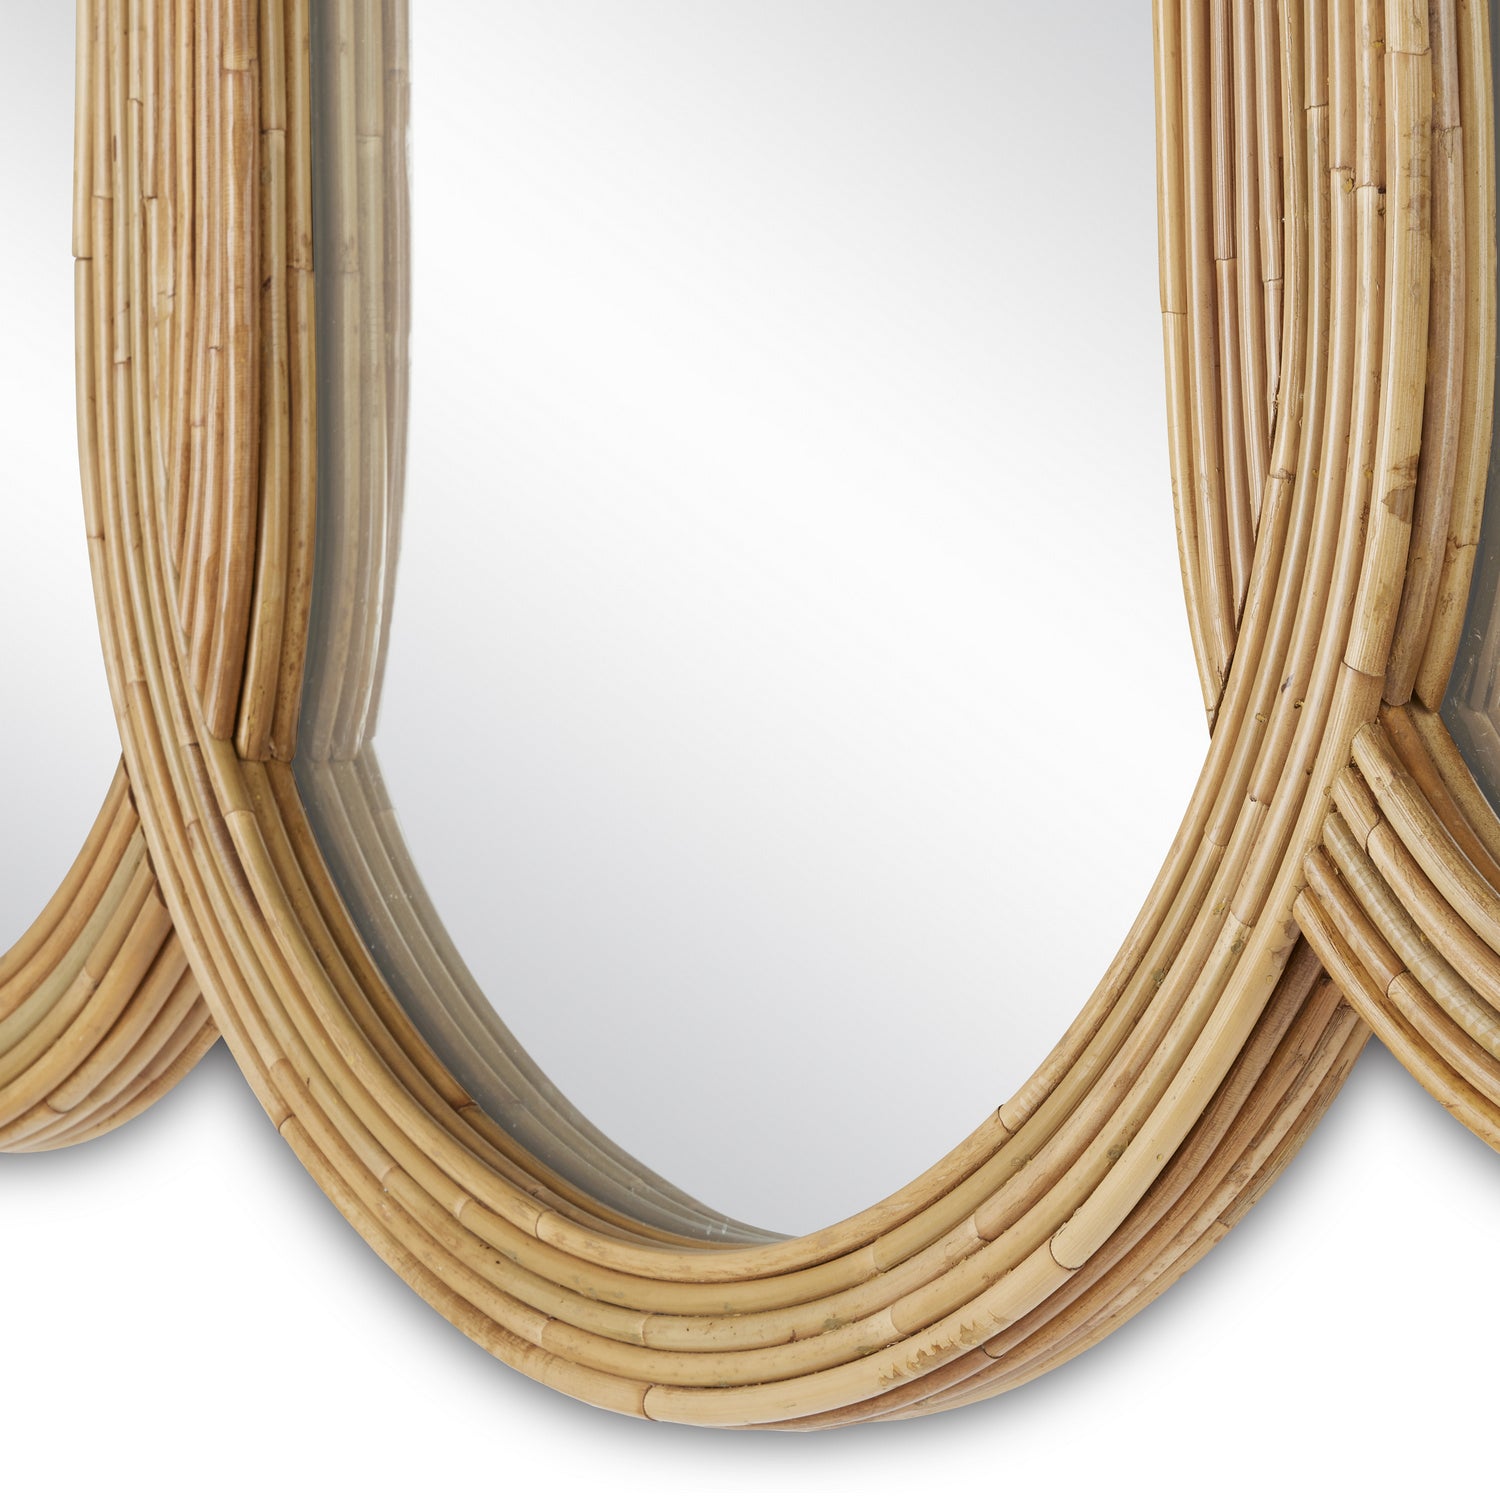 Mirror from the Triboa collection in Arurog/Khaki/Mirror finish